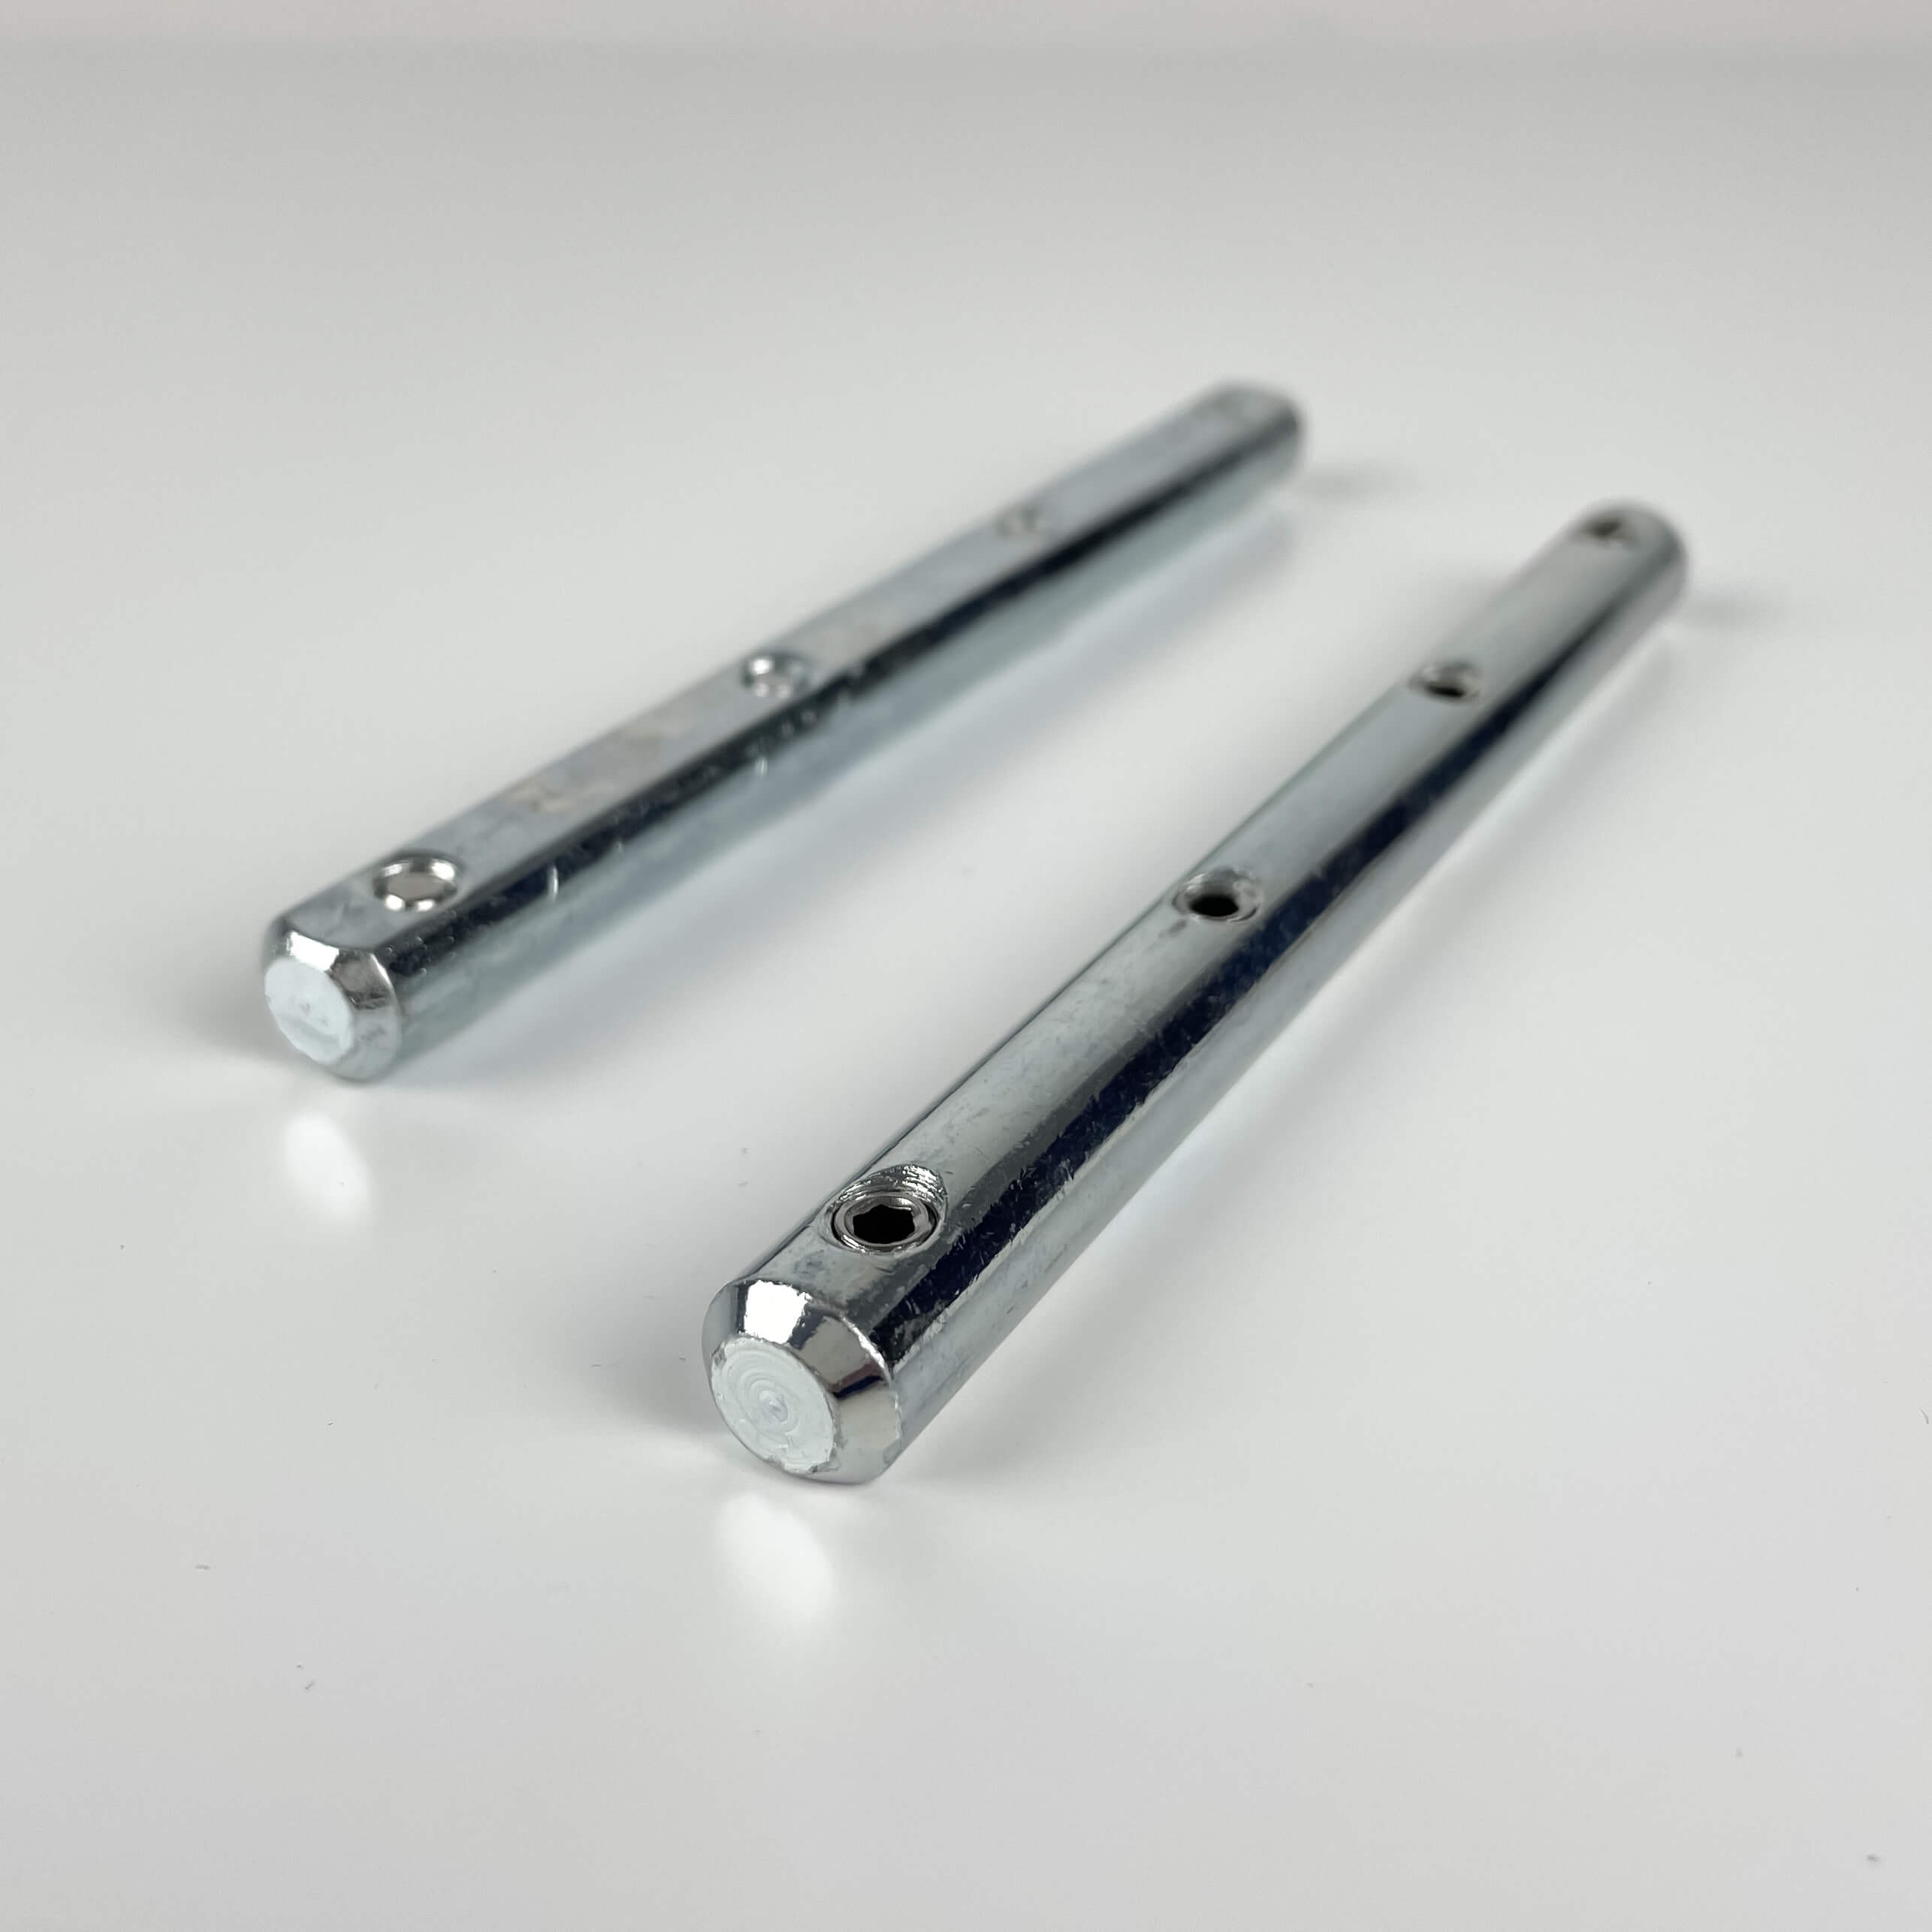 Profile connector straight for profile 17/44 mm aluminum channel